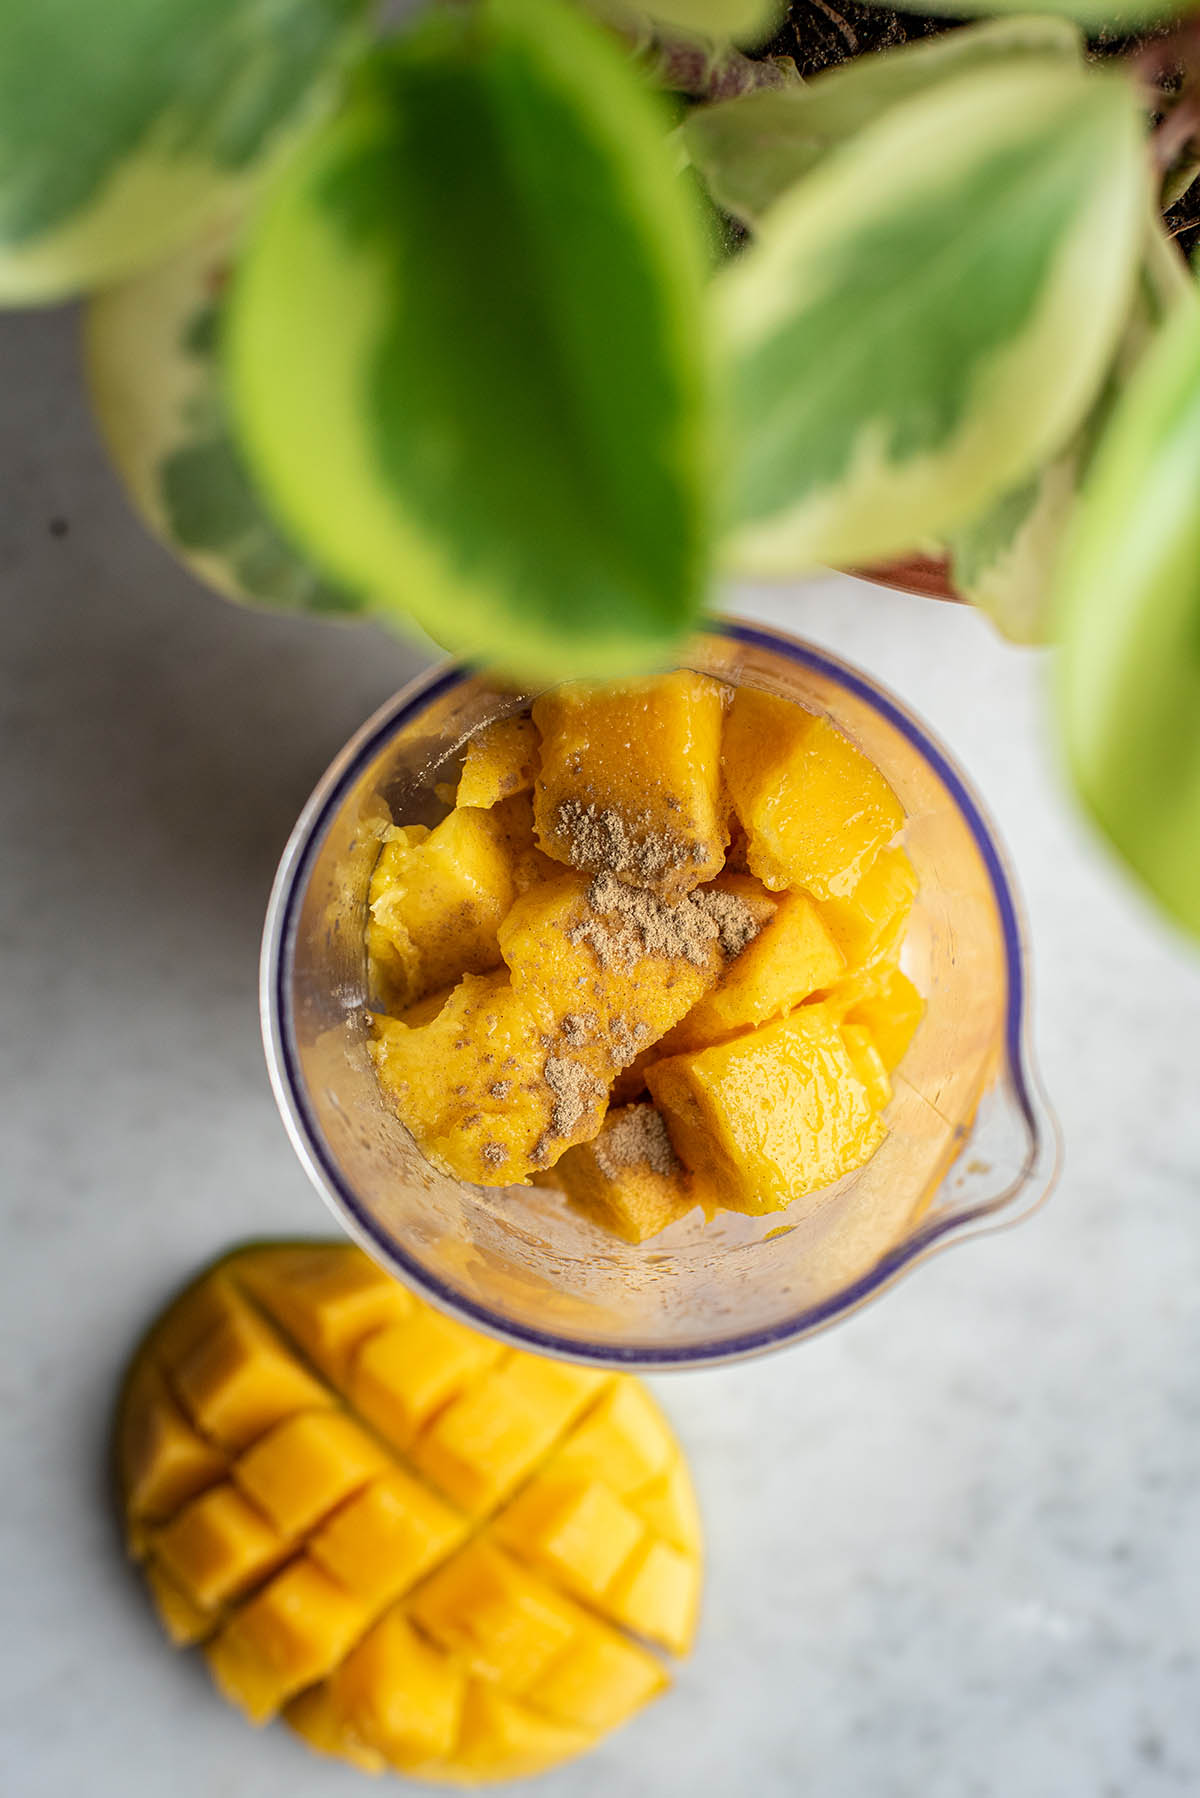 A mixing cup filled with fresh mango and cardamom.